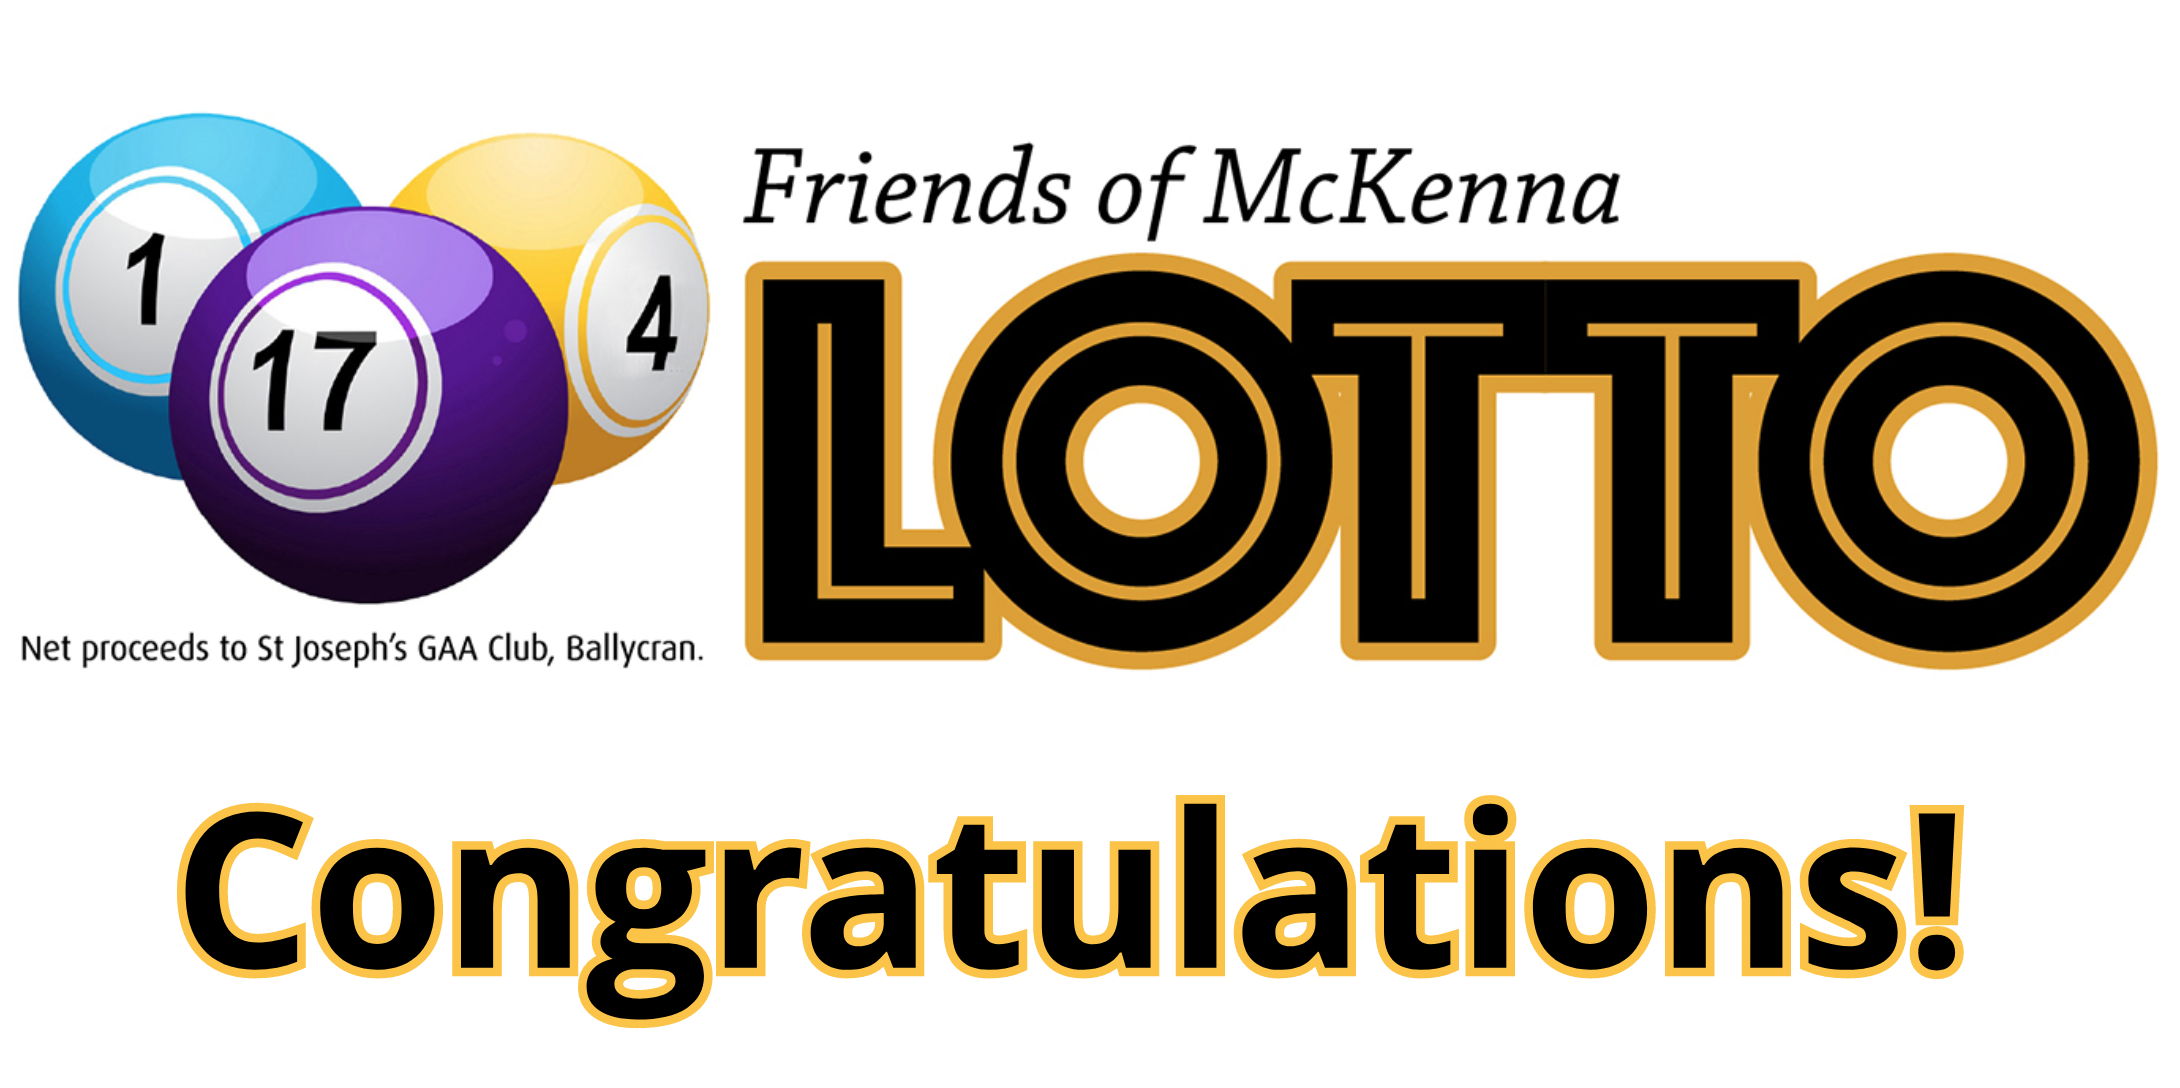 Friends of McKenna lotto result for Sunday 16th August 2020